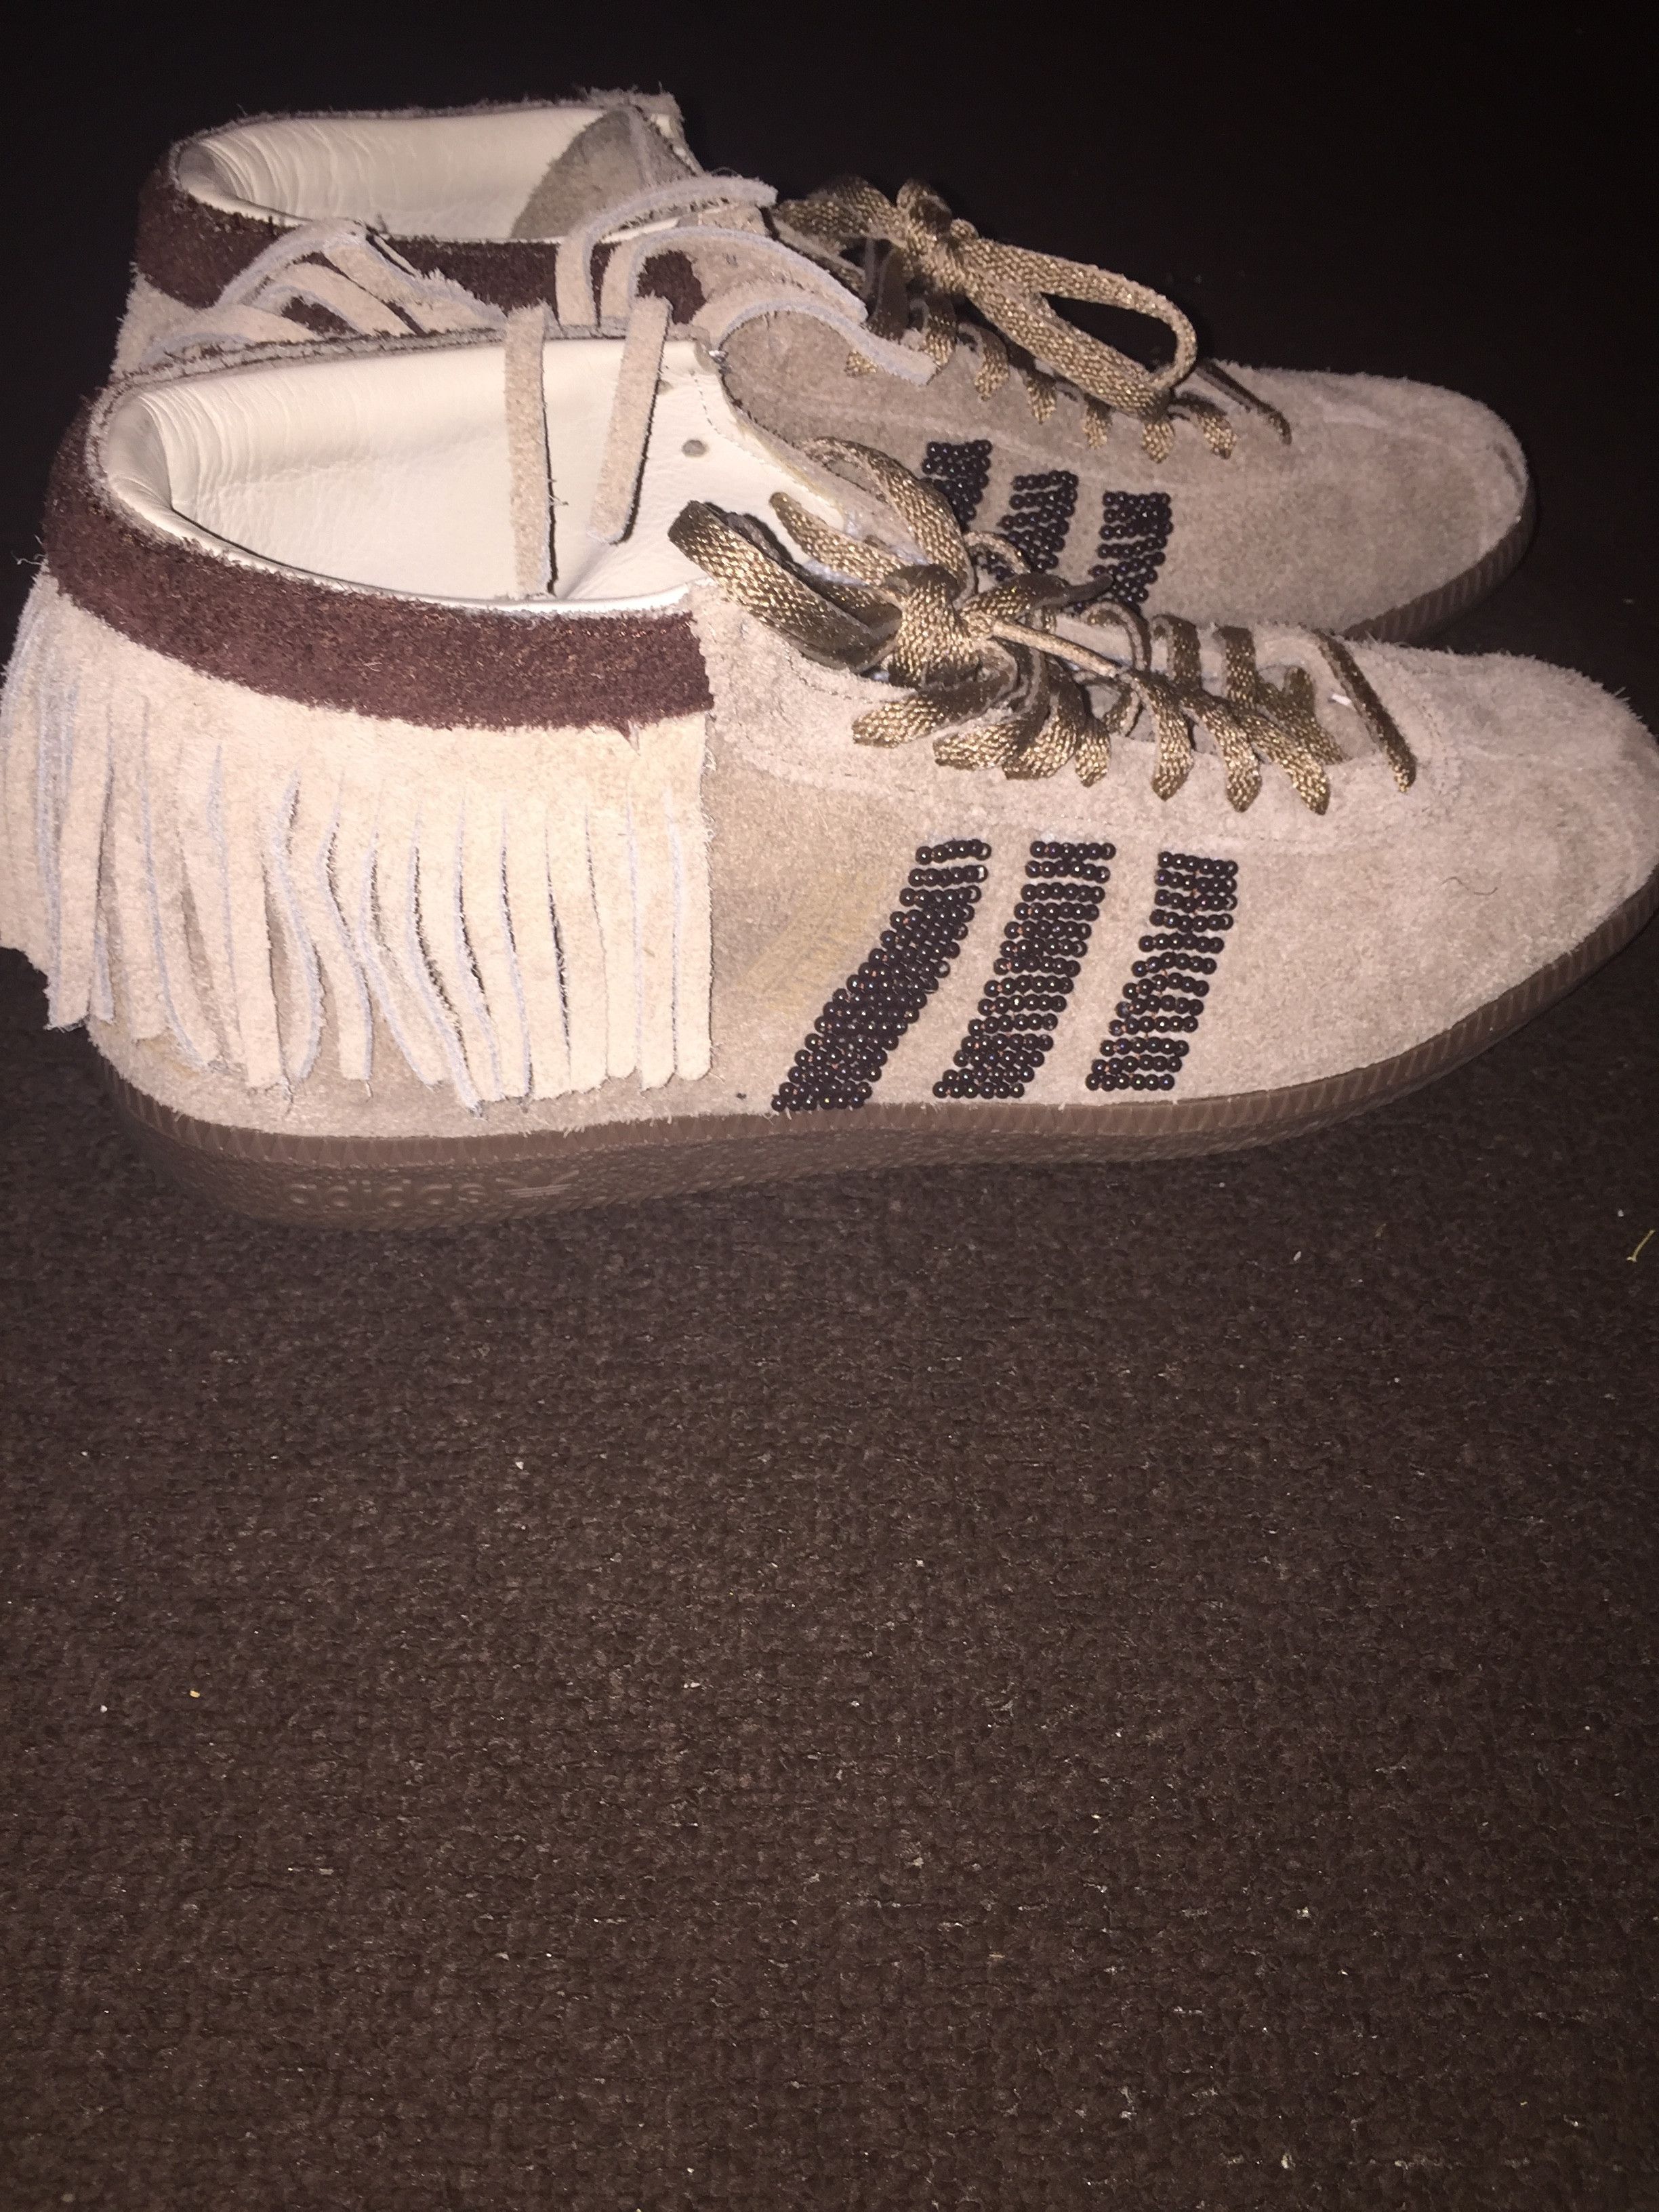 Adidas BH Moccasin Size US 10.5 / EU 43-44 - 1 Preview